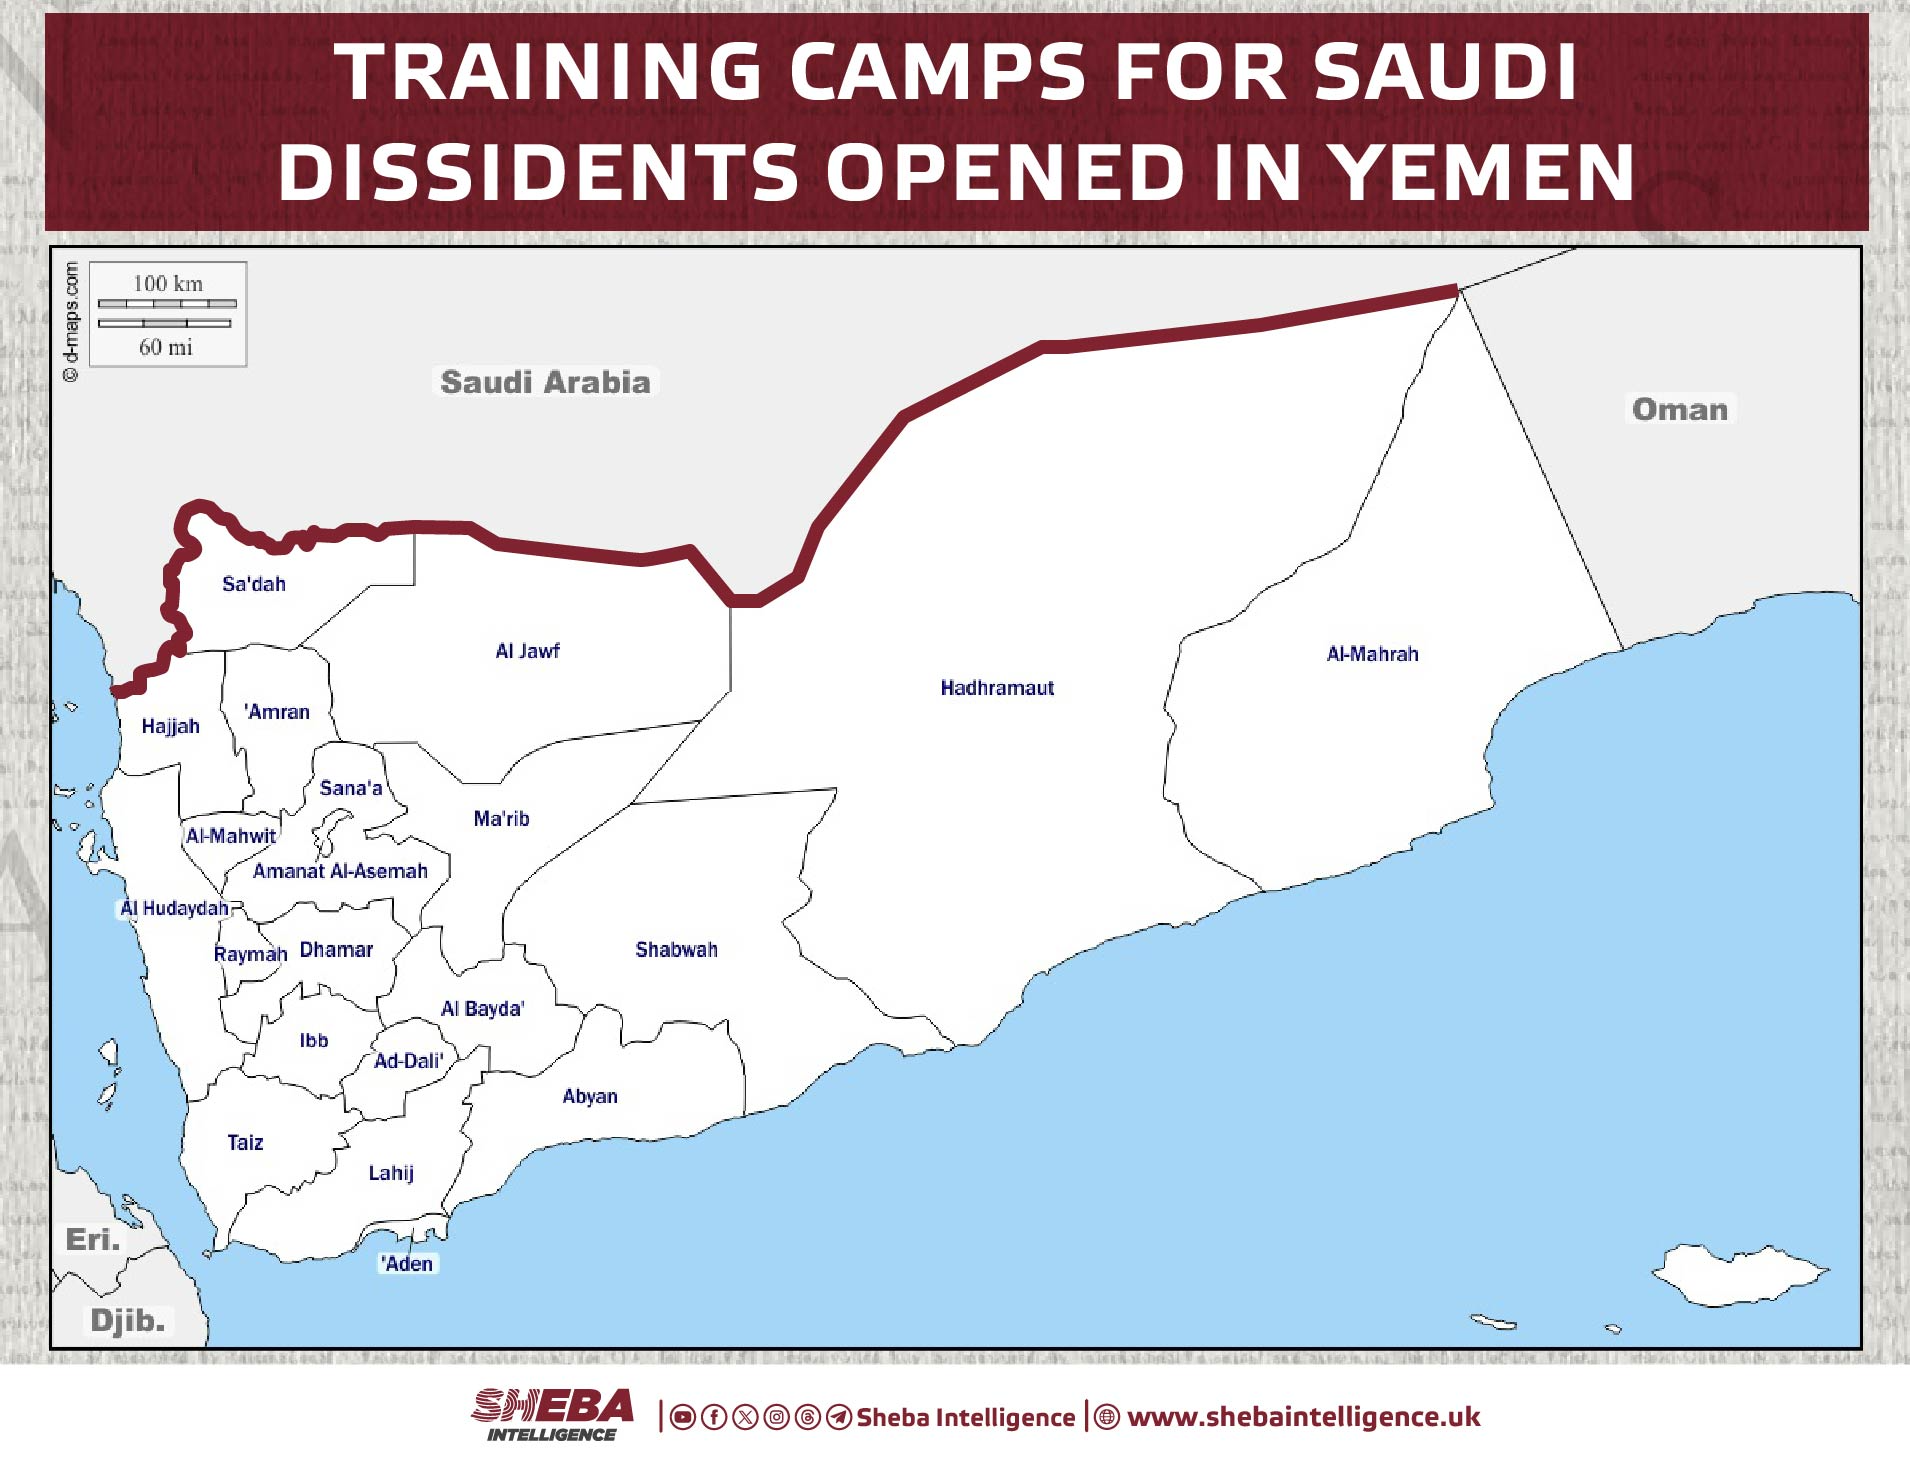 Training Camps for Saudi Dissidents Opened in Yemen